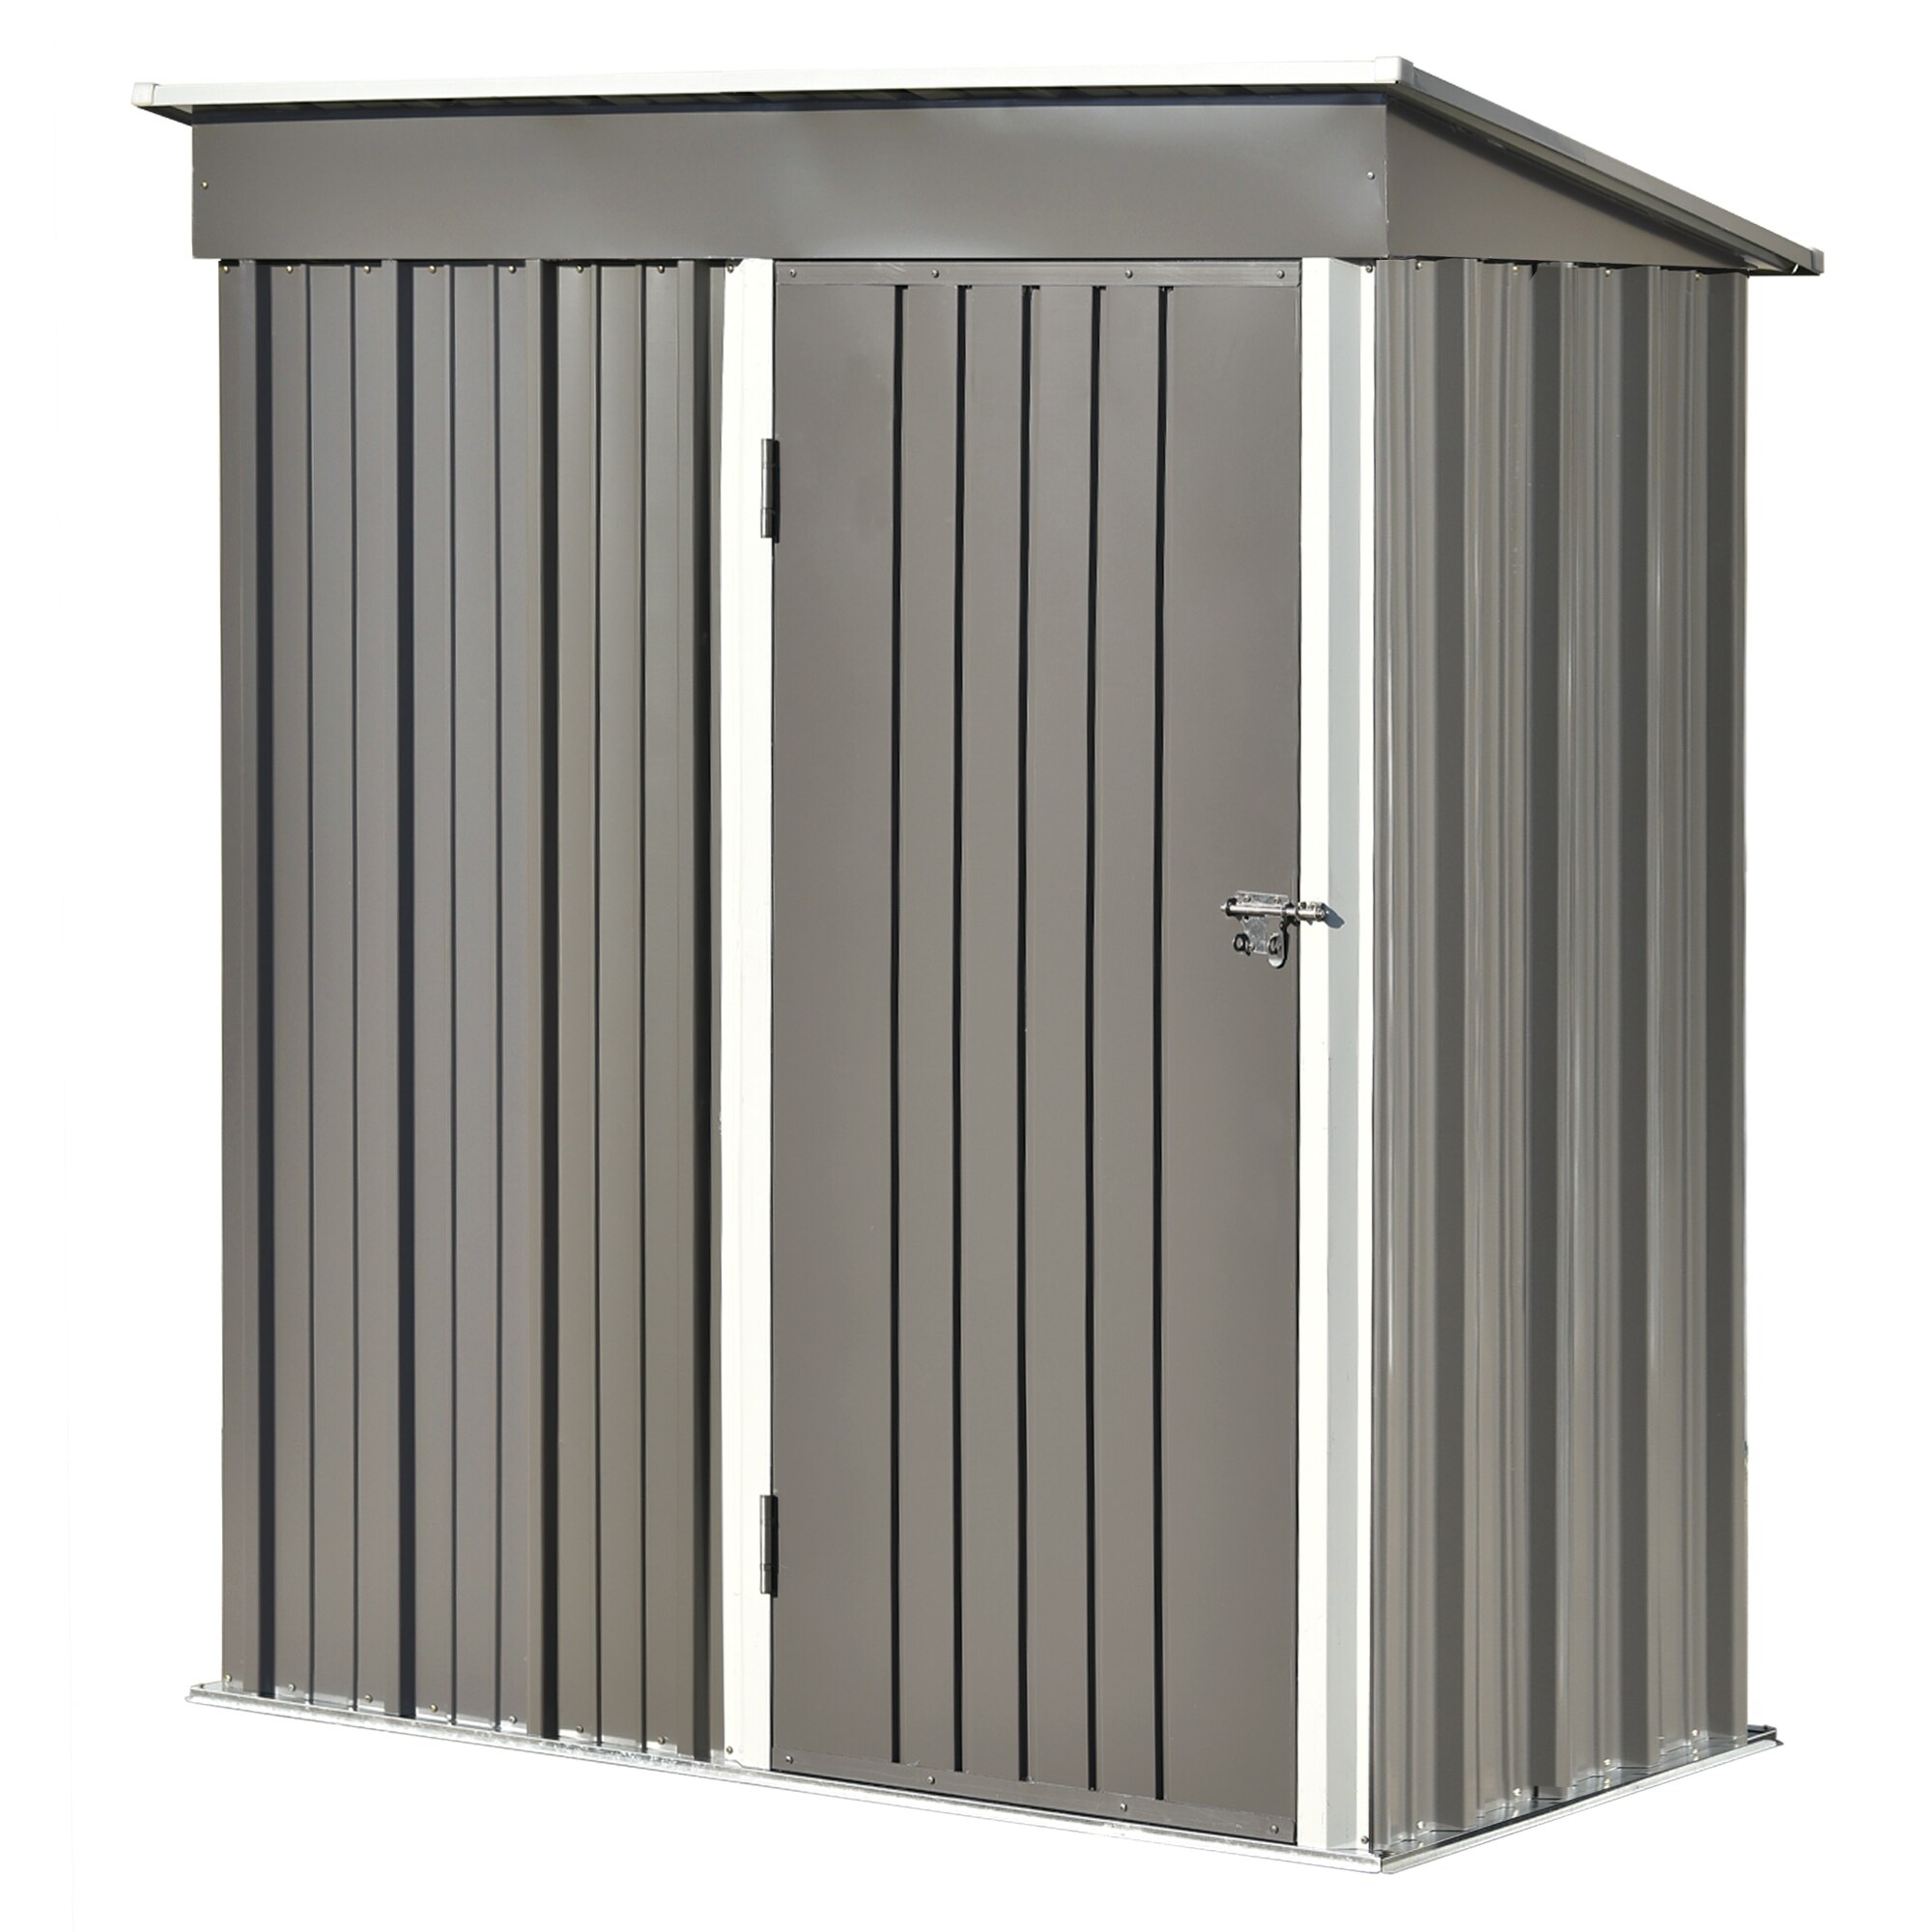 5 x3 FT Metal Lean-to Outdoor Storage Shed with Lockable Door, Tool Cabinet for Backyard, Garden, Gray